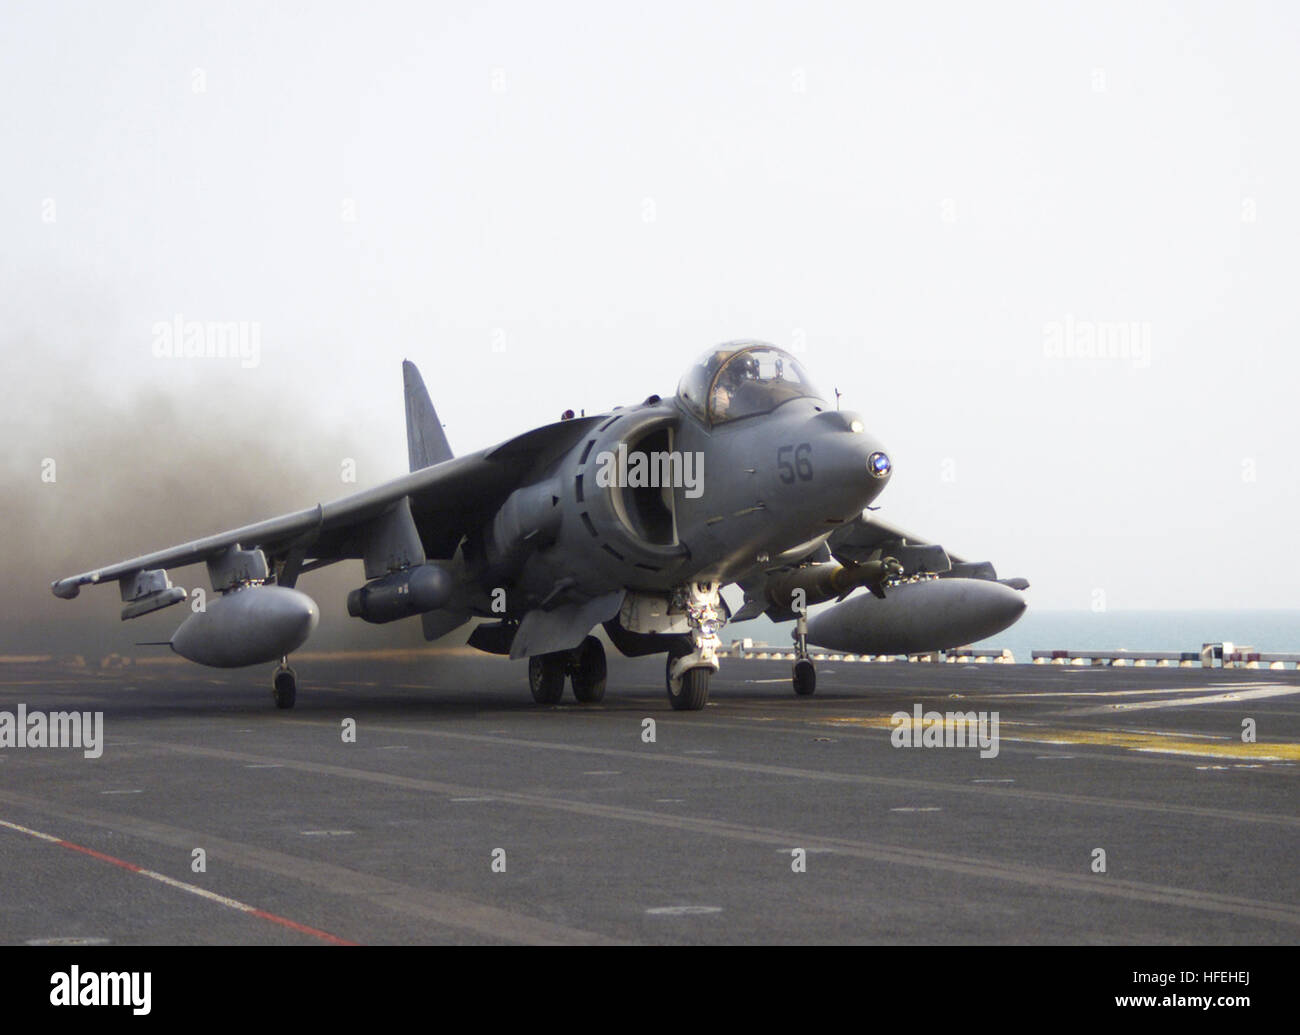 030325-N-7128D-002 The Arabian Gulf (Mar. 25, 2003) -- A Marine Corps AV-8B Harrier attack jet begins its takeoff roll on the flight deck of the USS Tarawa (LHA 1) on its way to provide close air support (CAS) for United States and Coaltion ground forces in southern Iraq in support of Operation Iraqi Freedom. Operation Iraqi Freedom is the multinational coalition effort to liberate the Iraqi people, eliminate Iraq's weapons of mass destruction and end the regime of Saddam Hussein.  U.S. Navy photo by Chief Photographer's Mate Tom Daily.  (RELEASED) US Navy 030325-N-7128D-002 A Marine Corps AV- Stock Photo